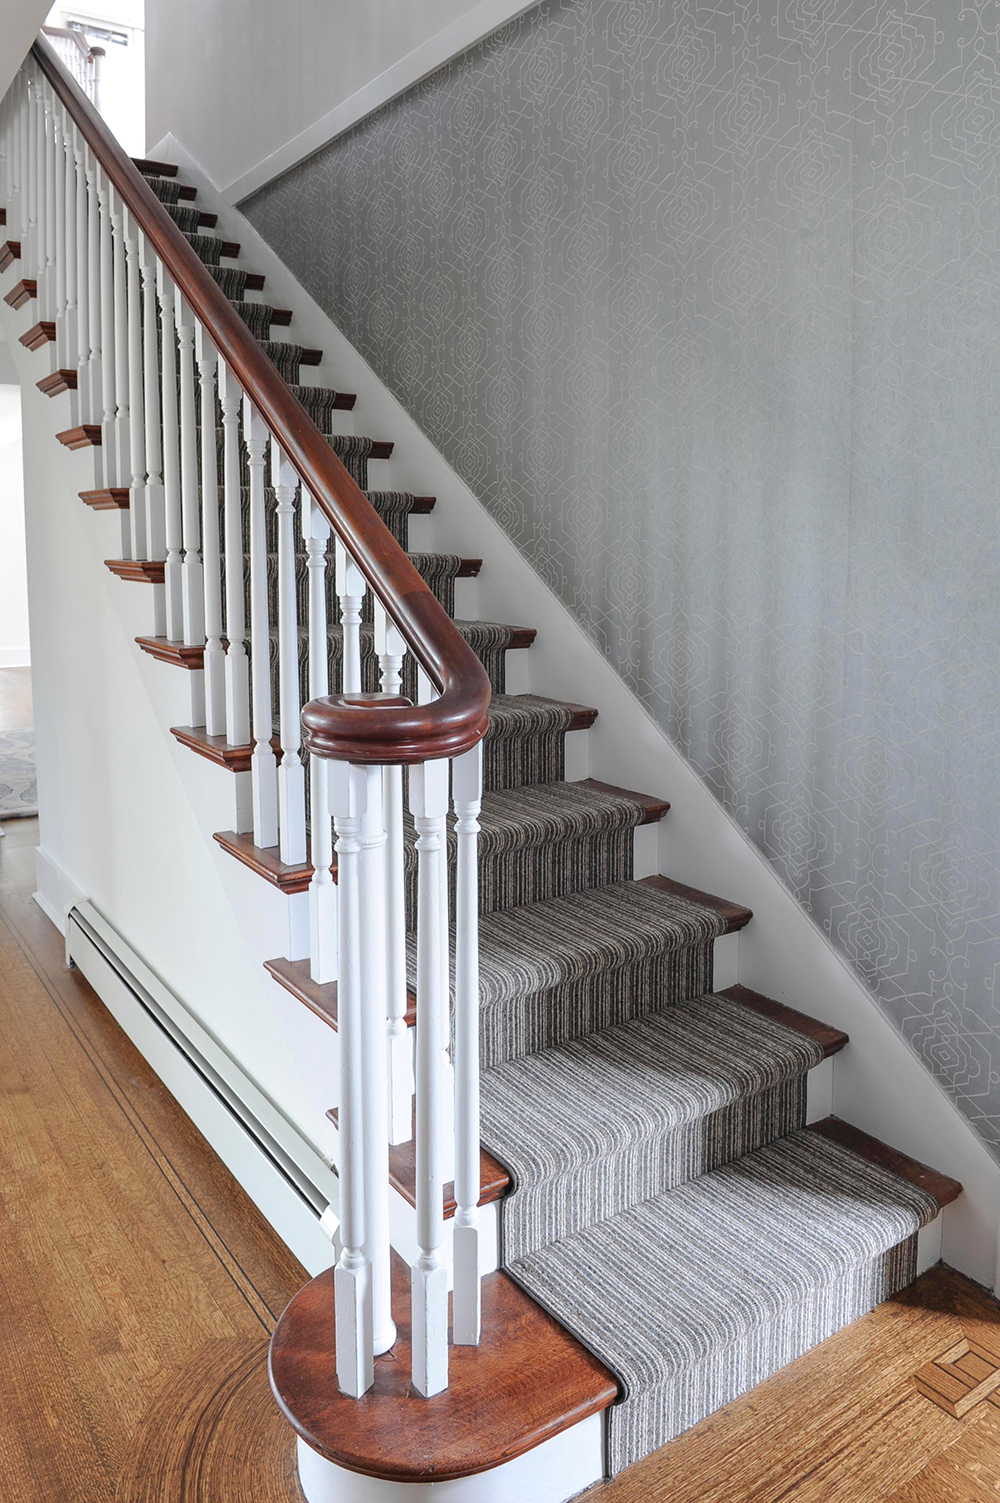 A striped runner adds depth and warmth to the staircase and nicely plays up the original inlay details in the floor.